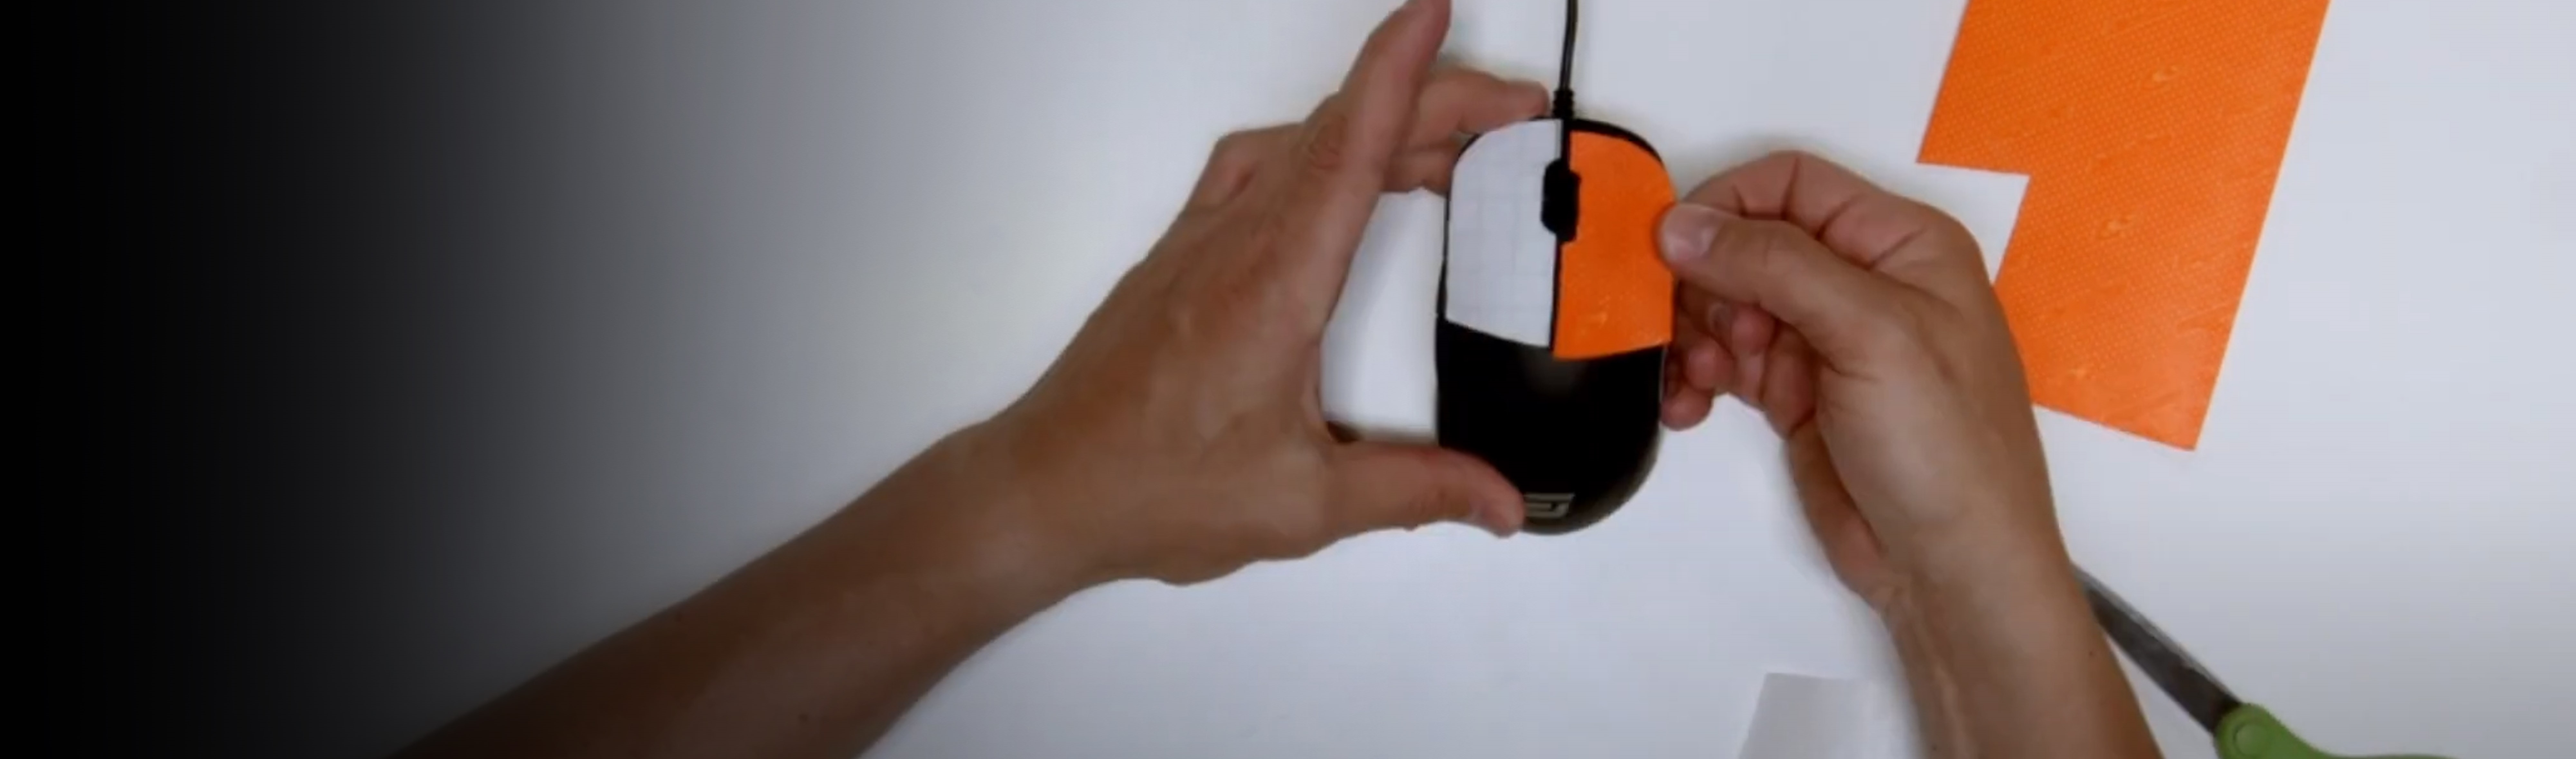 Hands applying mouse grip to a computer mouse